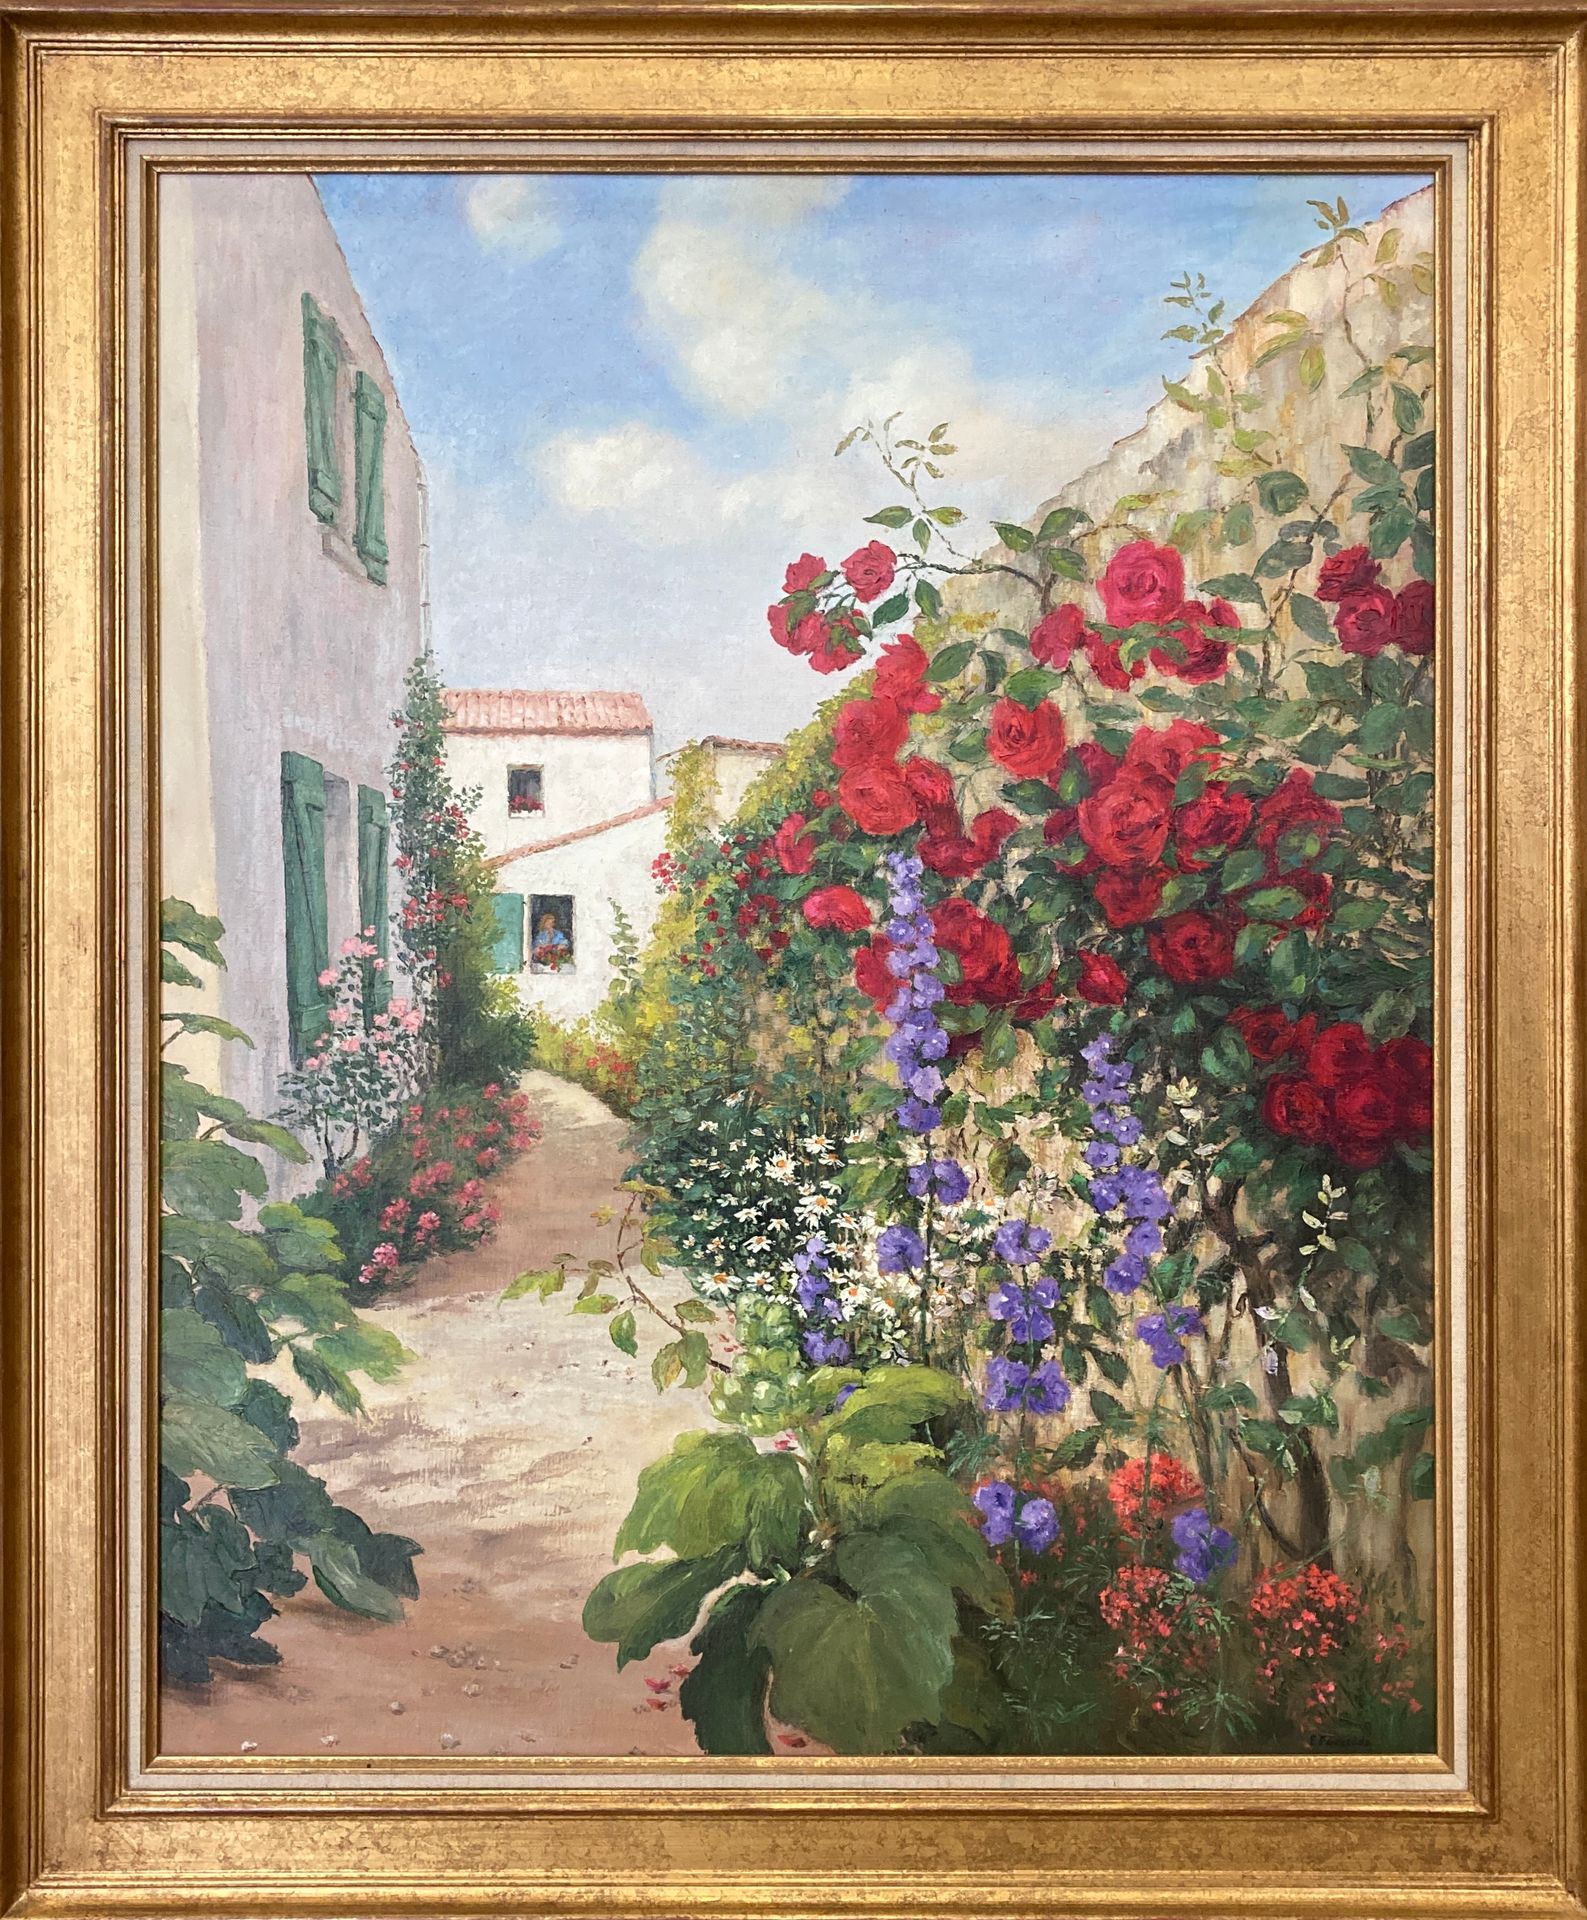 Null Elisabeth FOURCADE 

"Flowery alley".

Oil on canvas.

Signed lower right.
&hellip;